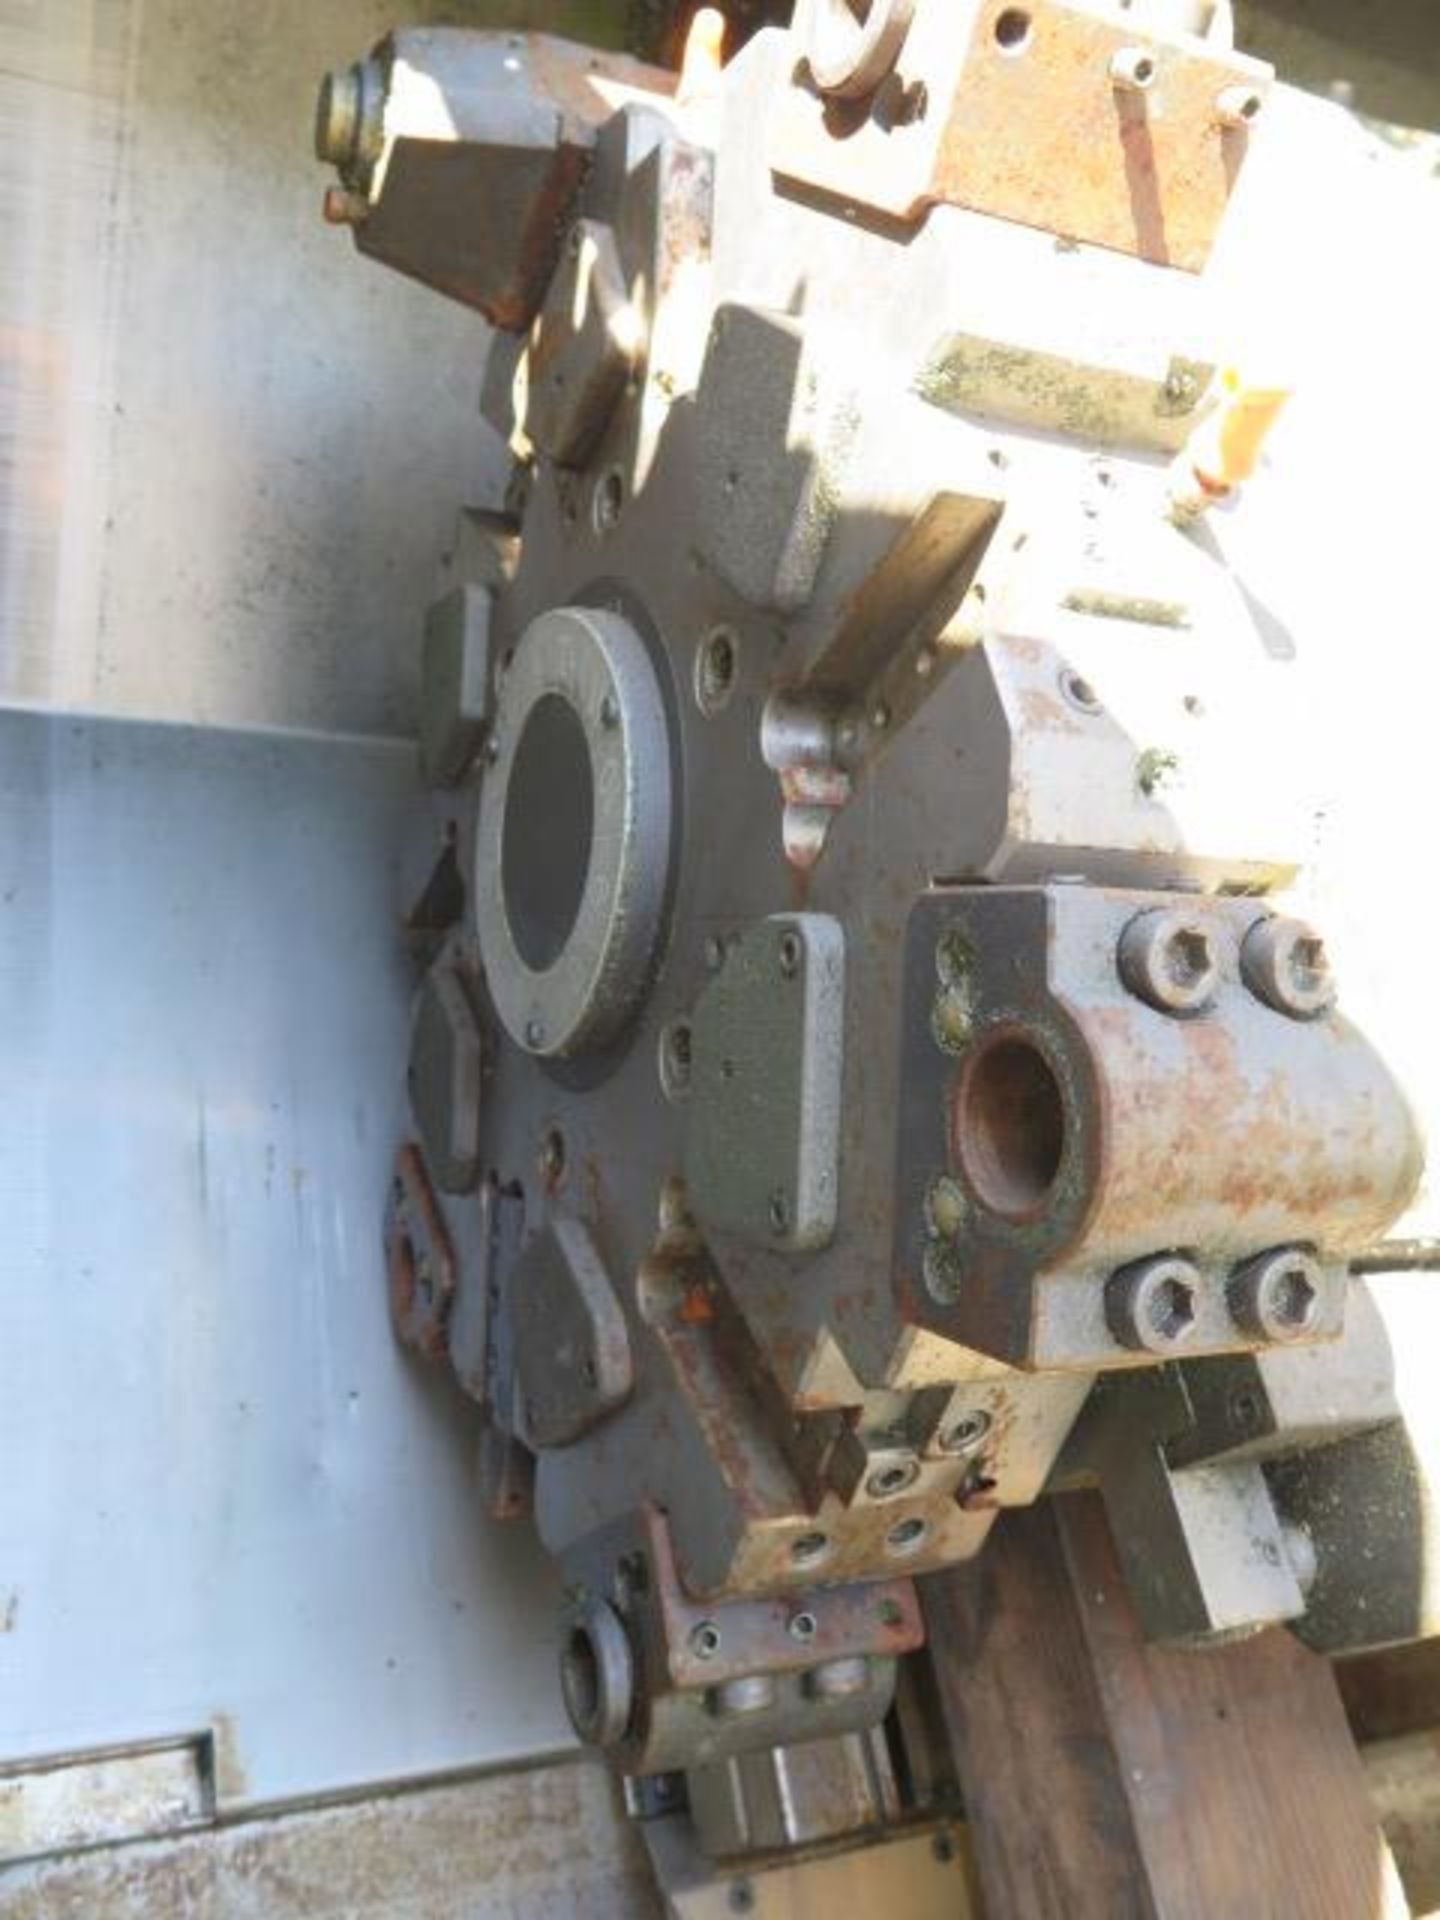 Mori Seiki ZL-15SM Twin Spindle - Twin Turret CNC Turning Center (NEEDS WORK) s/n 254, SOLD AS IS - Image 5 of 13